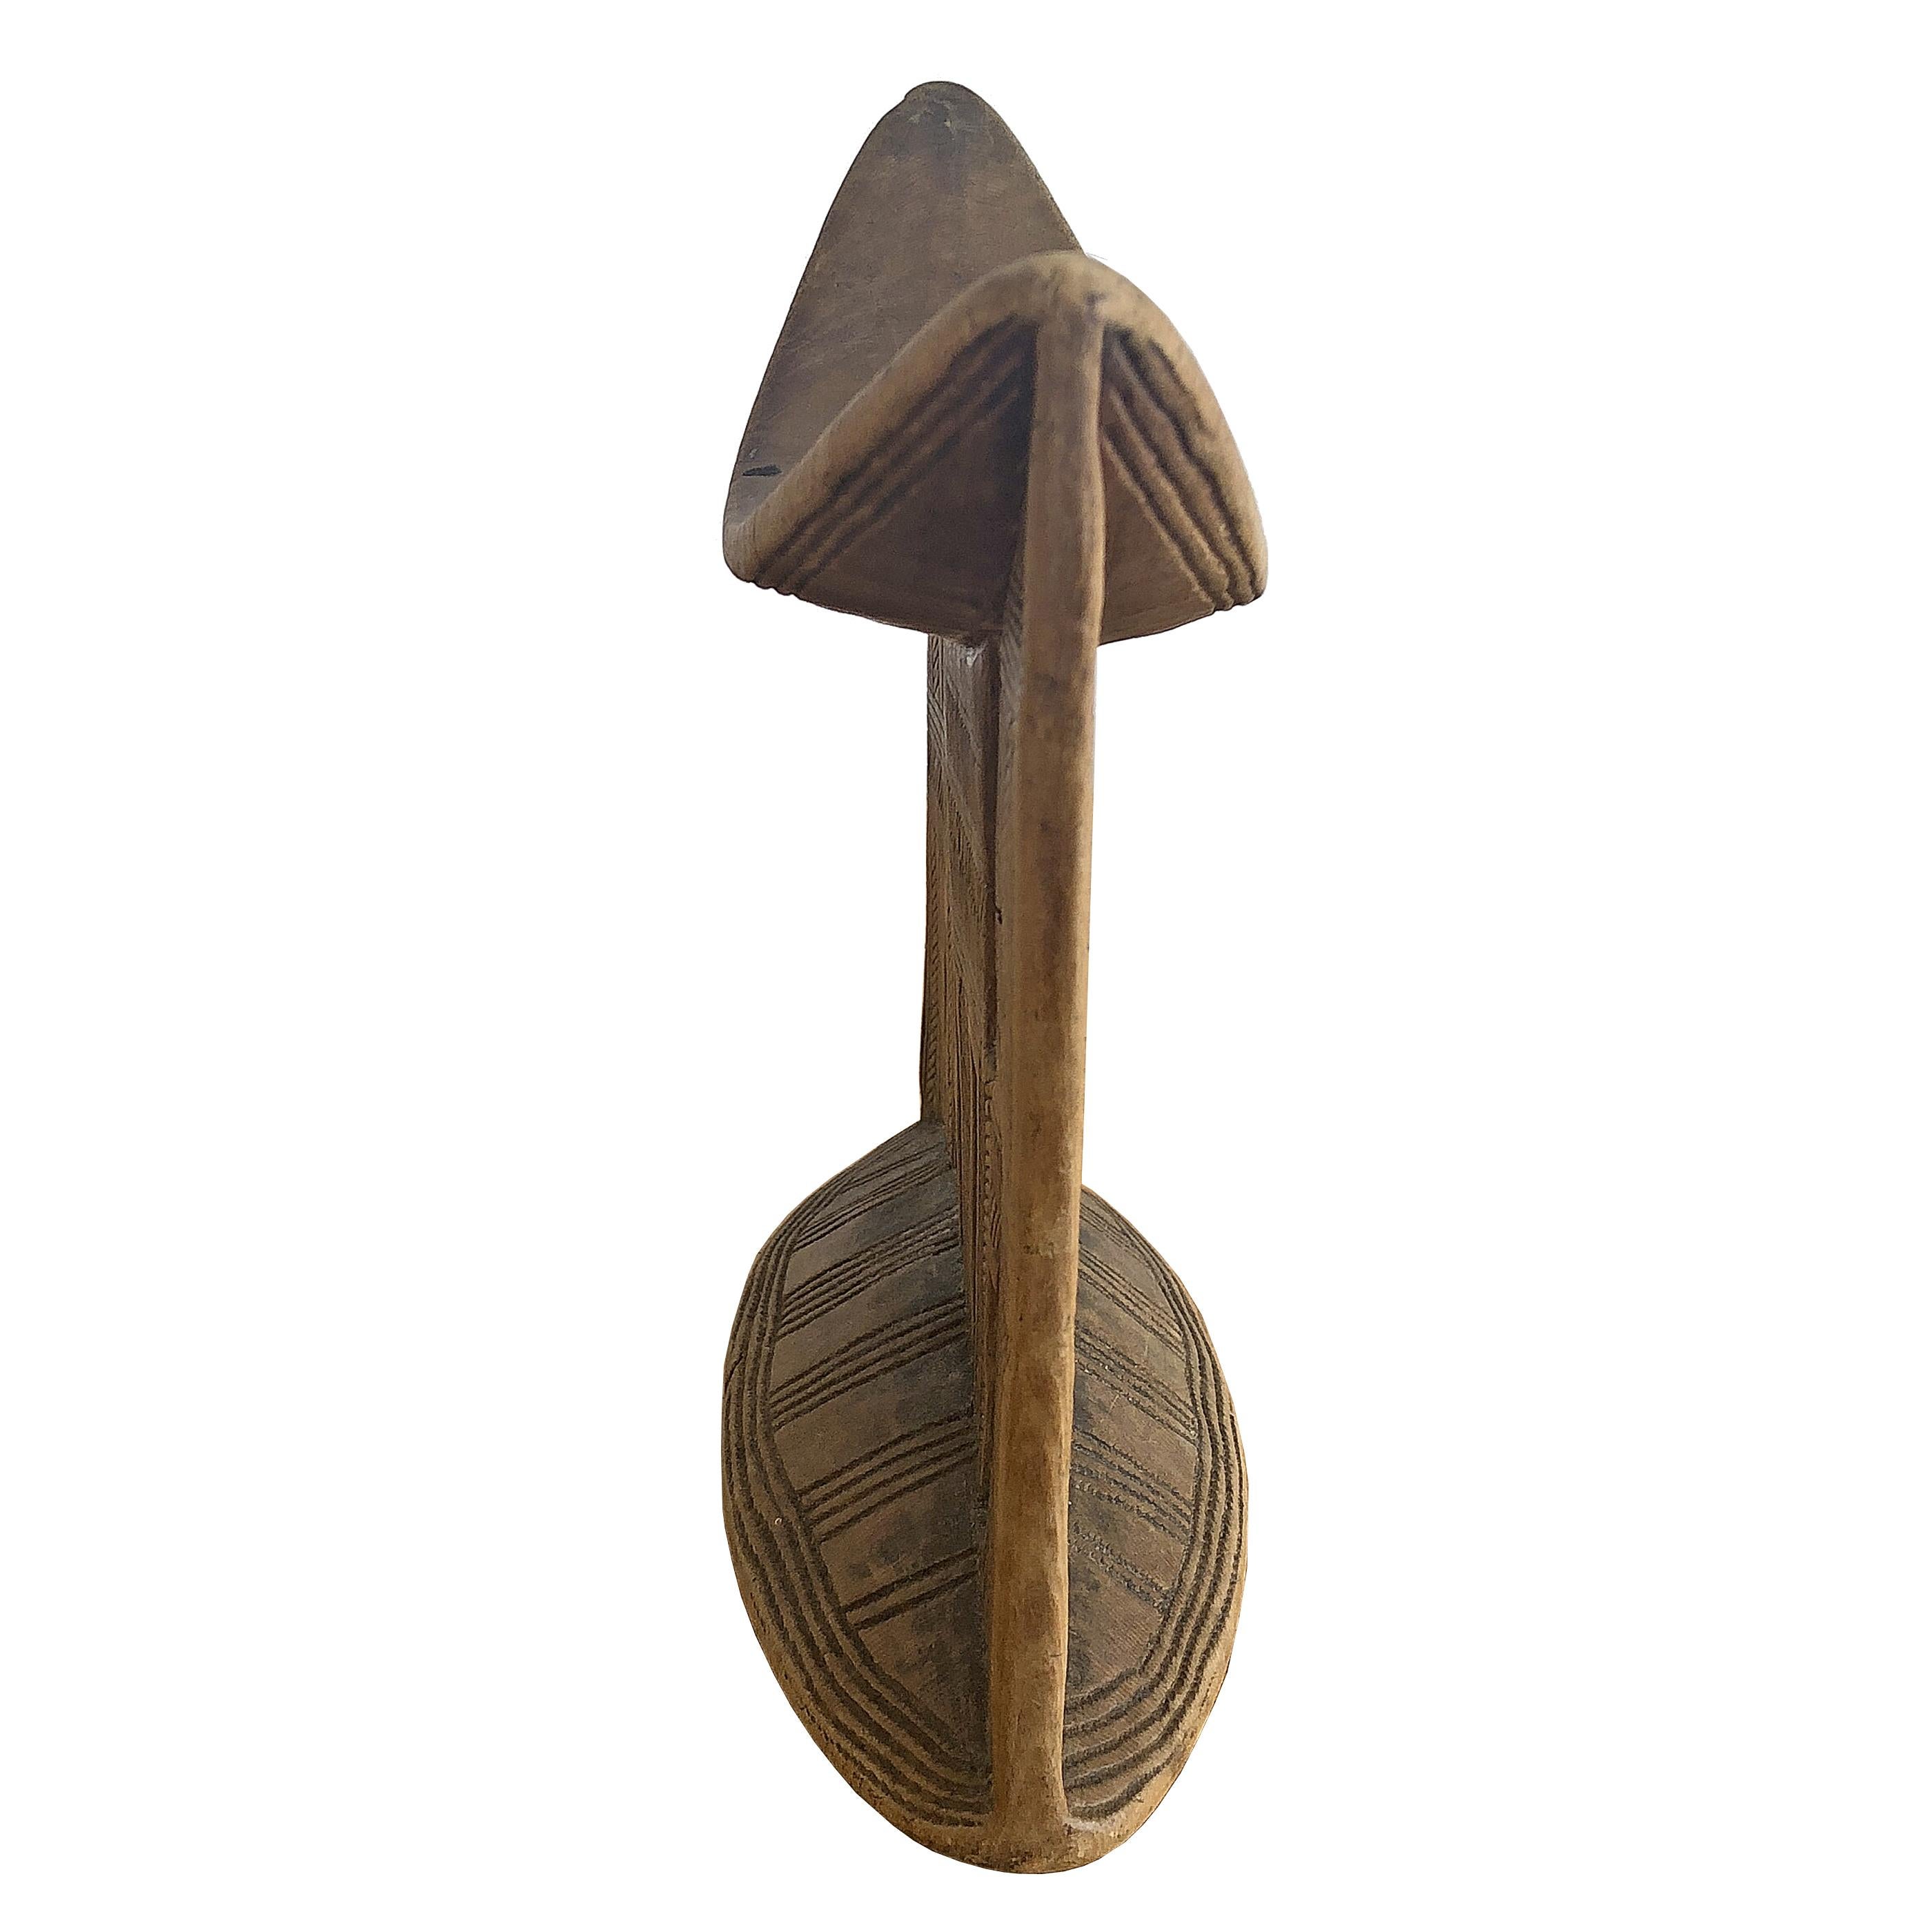 An African tribal headrest in a light, wheat-colored wood with incised geometric carvings from the Sidama People of Ethiopia. Made from a single piece of wood this handsome headrest was made to serve as a utilitarian object to be used in everyday